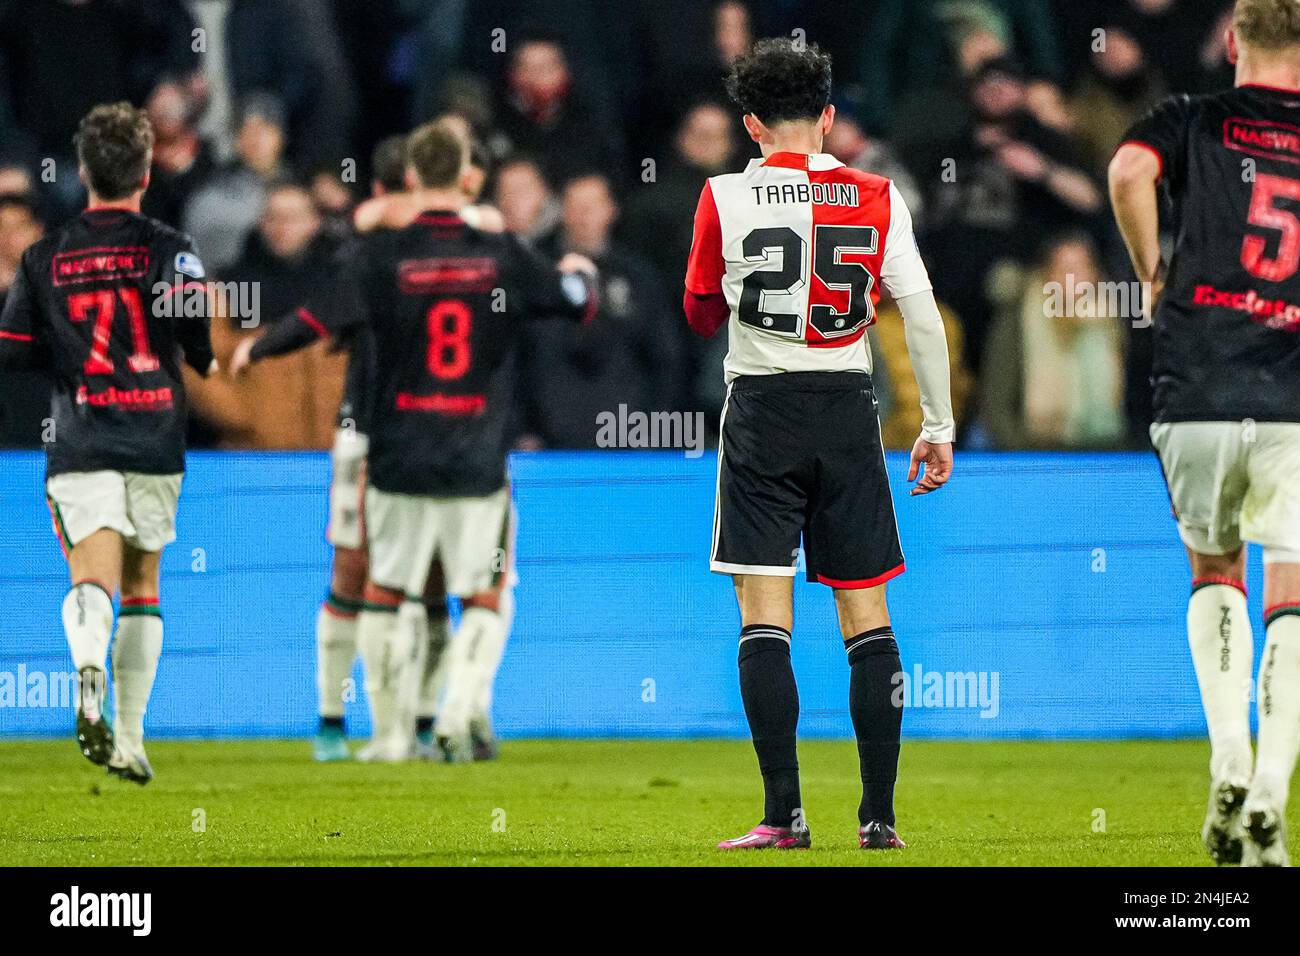 Rotterdam - Mohamed Taabouni of Feyenoord reacts to the 0-2 during the match between Feyenoord v NEC Nijmegen at Stadion Feijenoord De Kuip on 8 February 2023 in Rotterdam, Netherlands. (Box to Box Pictures/Tom Bode) Stock Photo